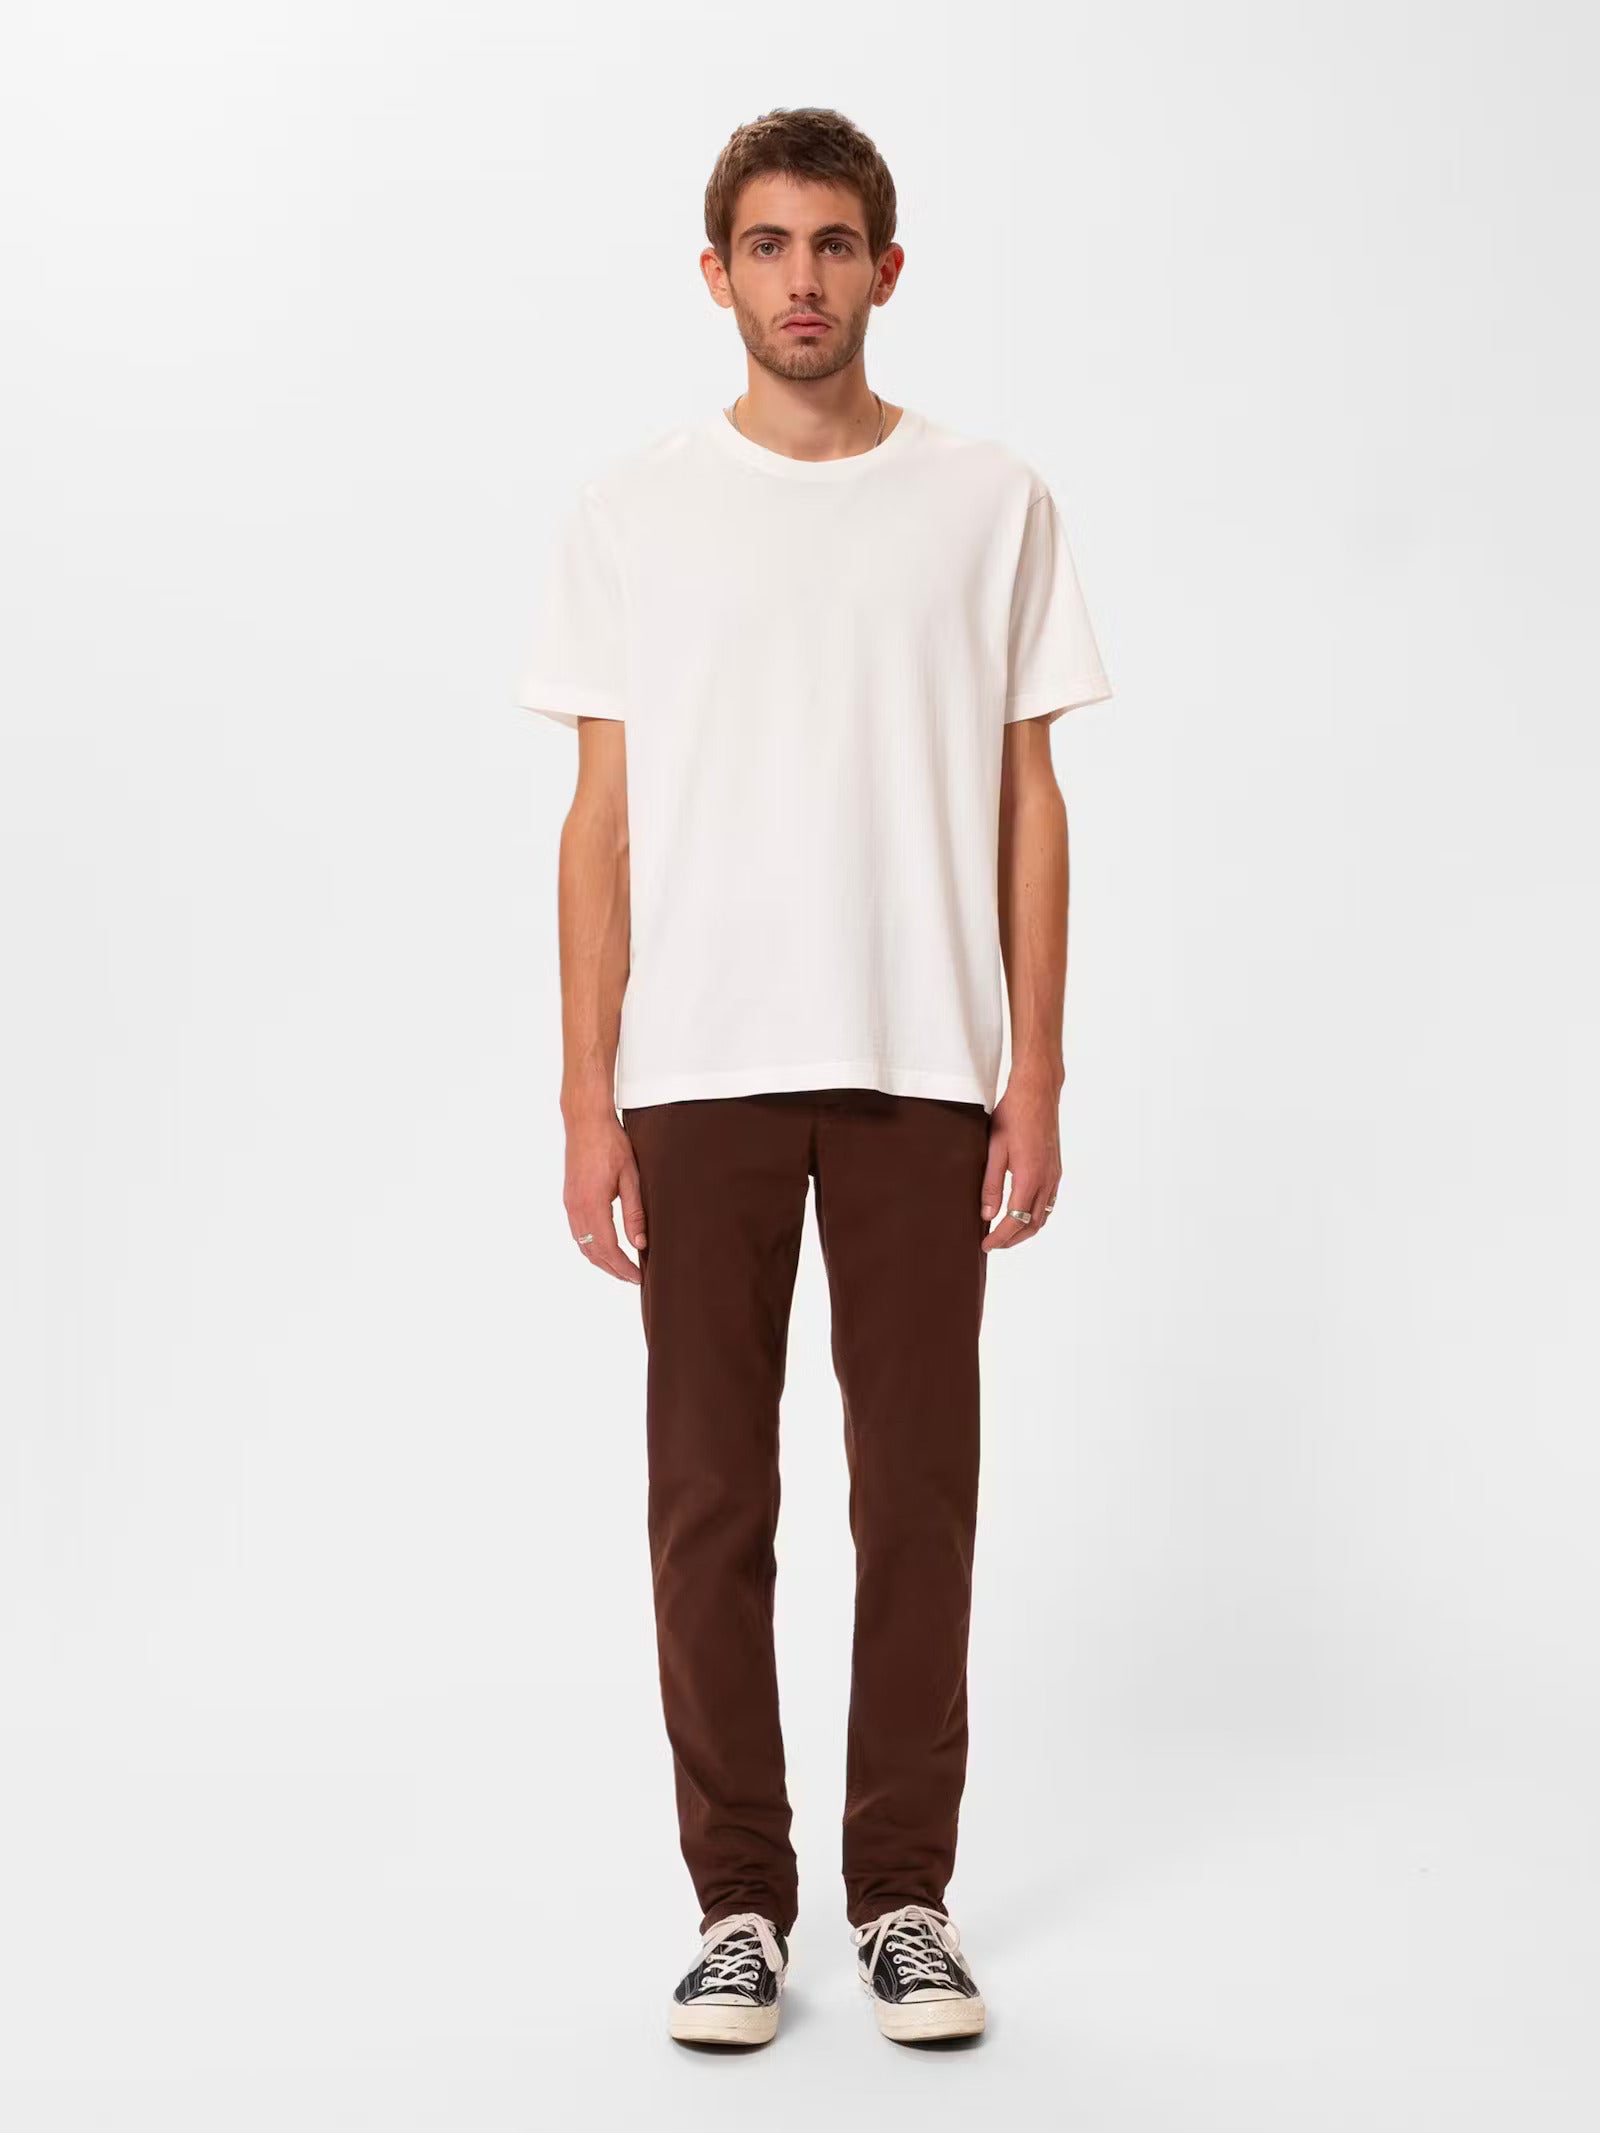 Easy Alvin Chino Pant - Washed Brown - Nudie Jeans - Danali